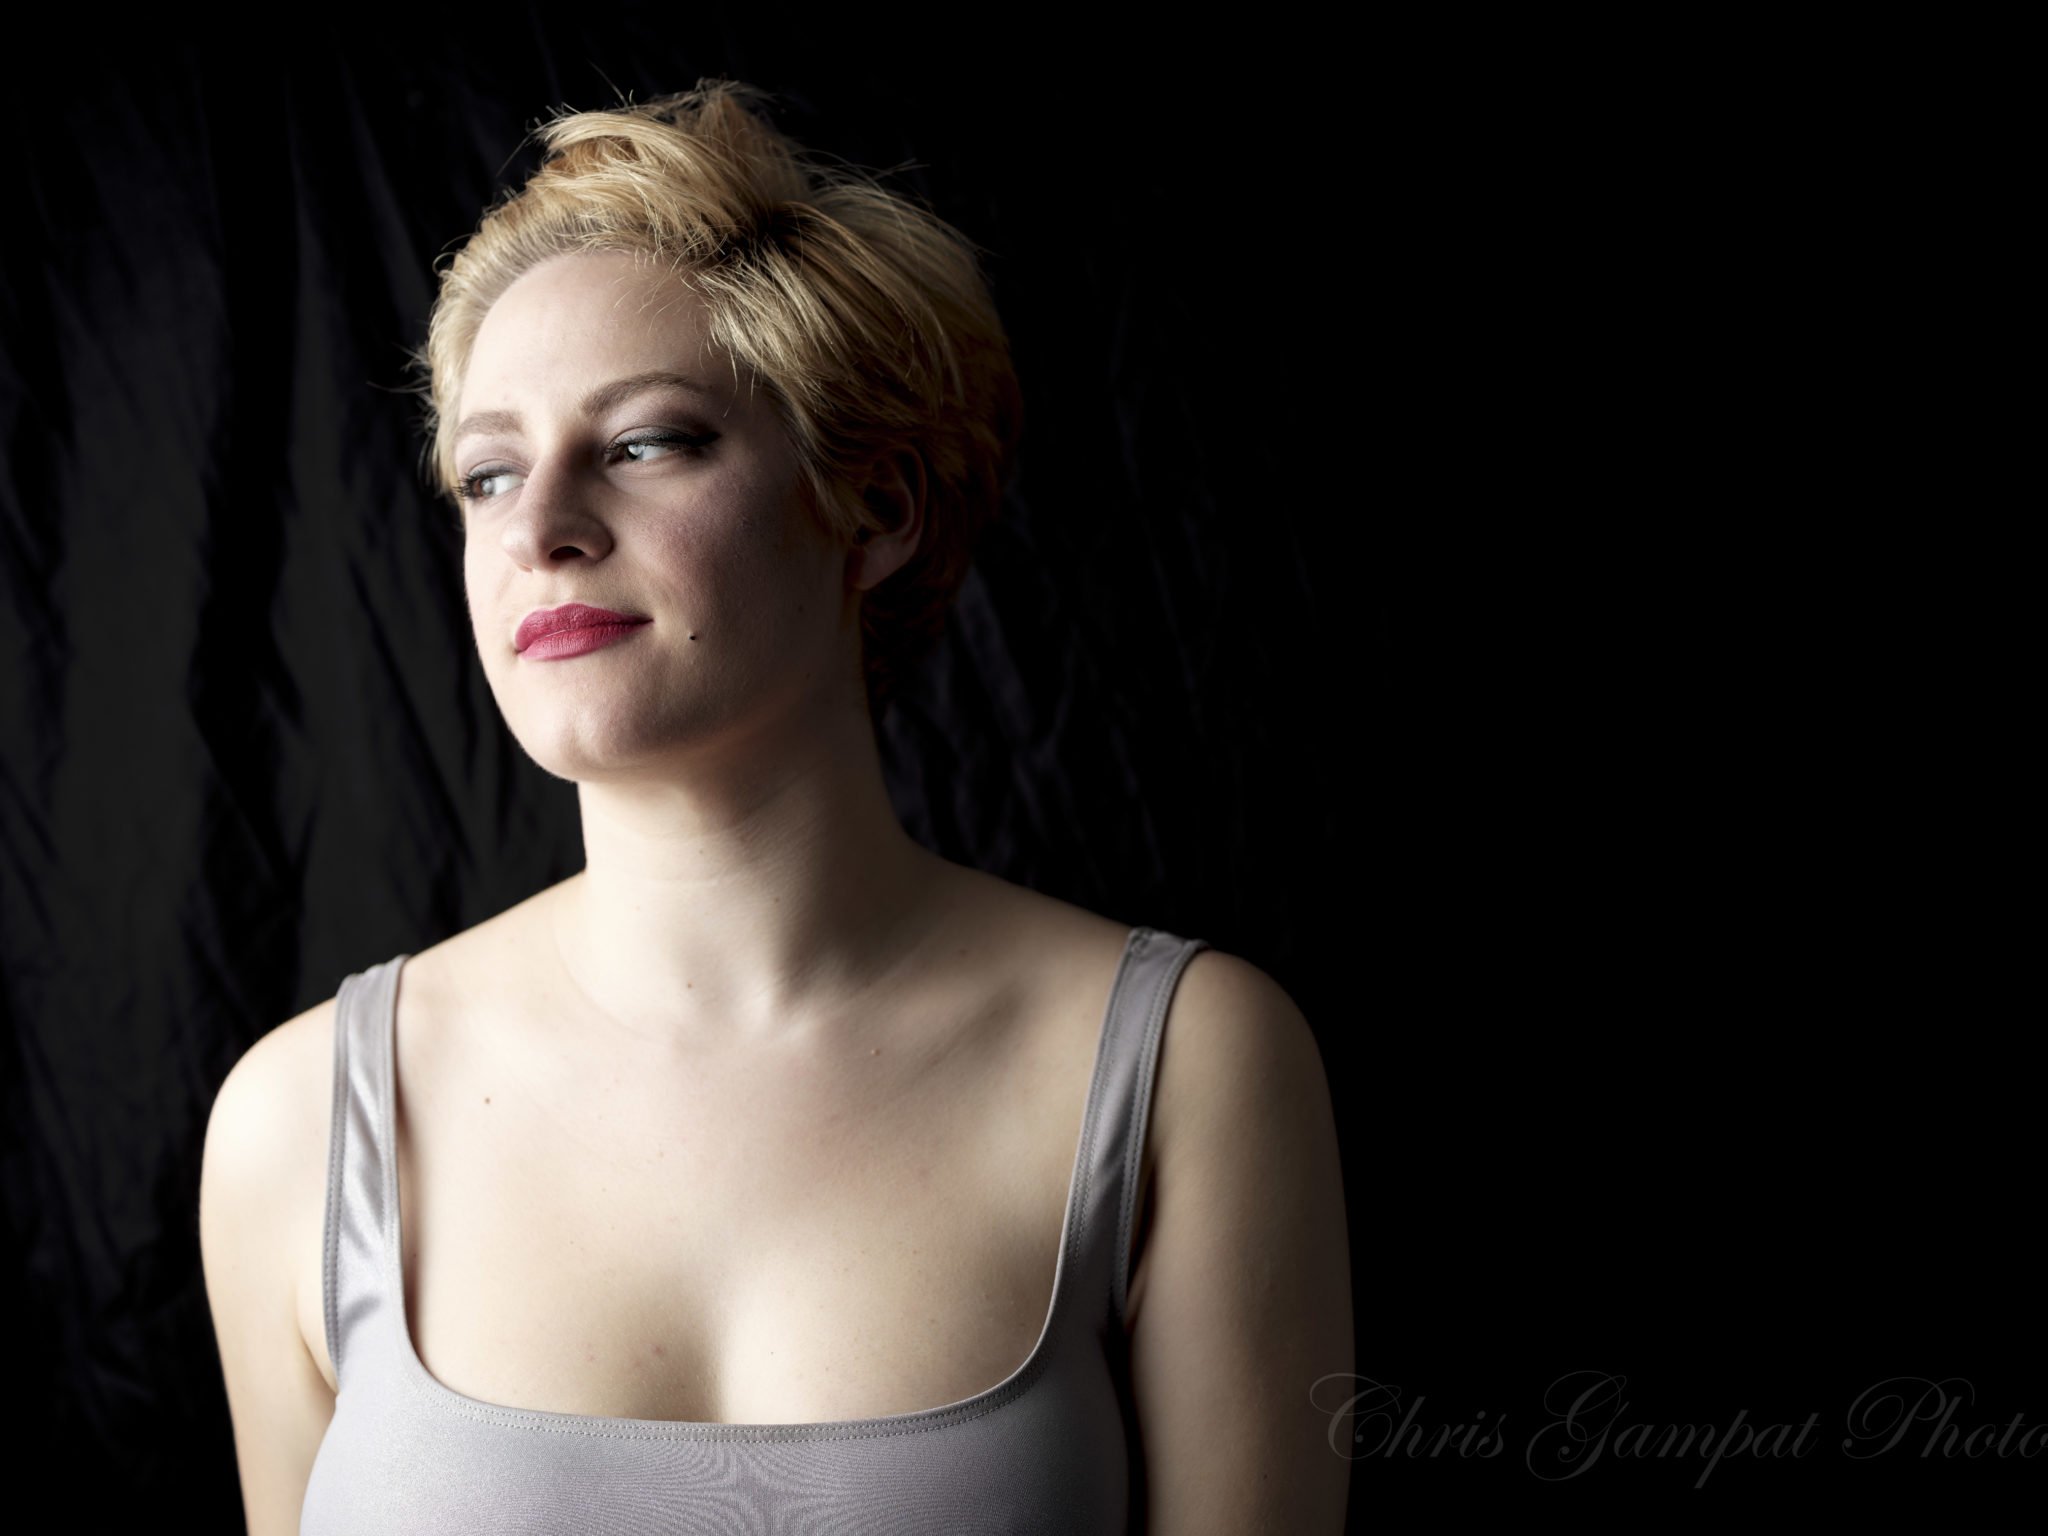 Photography Cheat Sheet: Comparing Light Modifiers for Portraiture